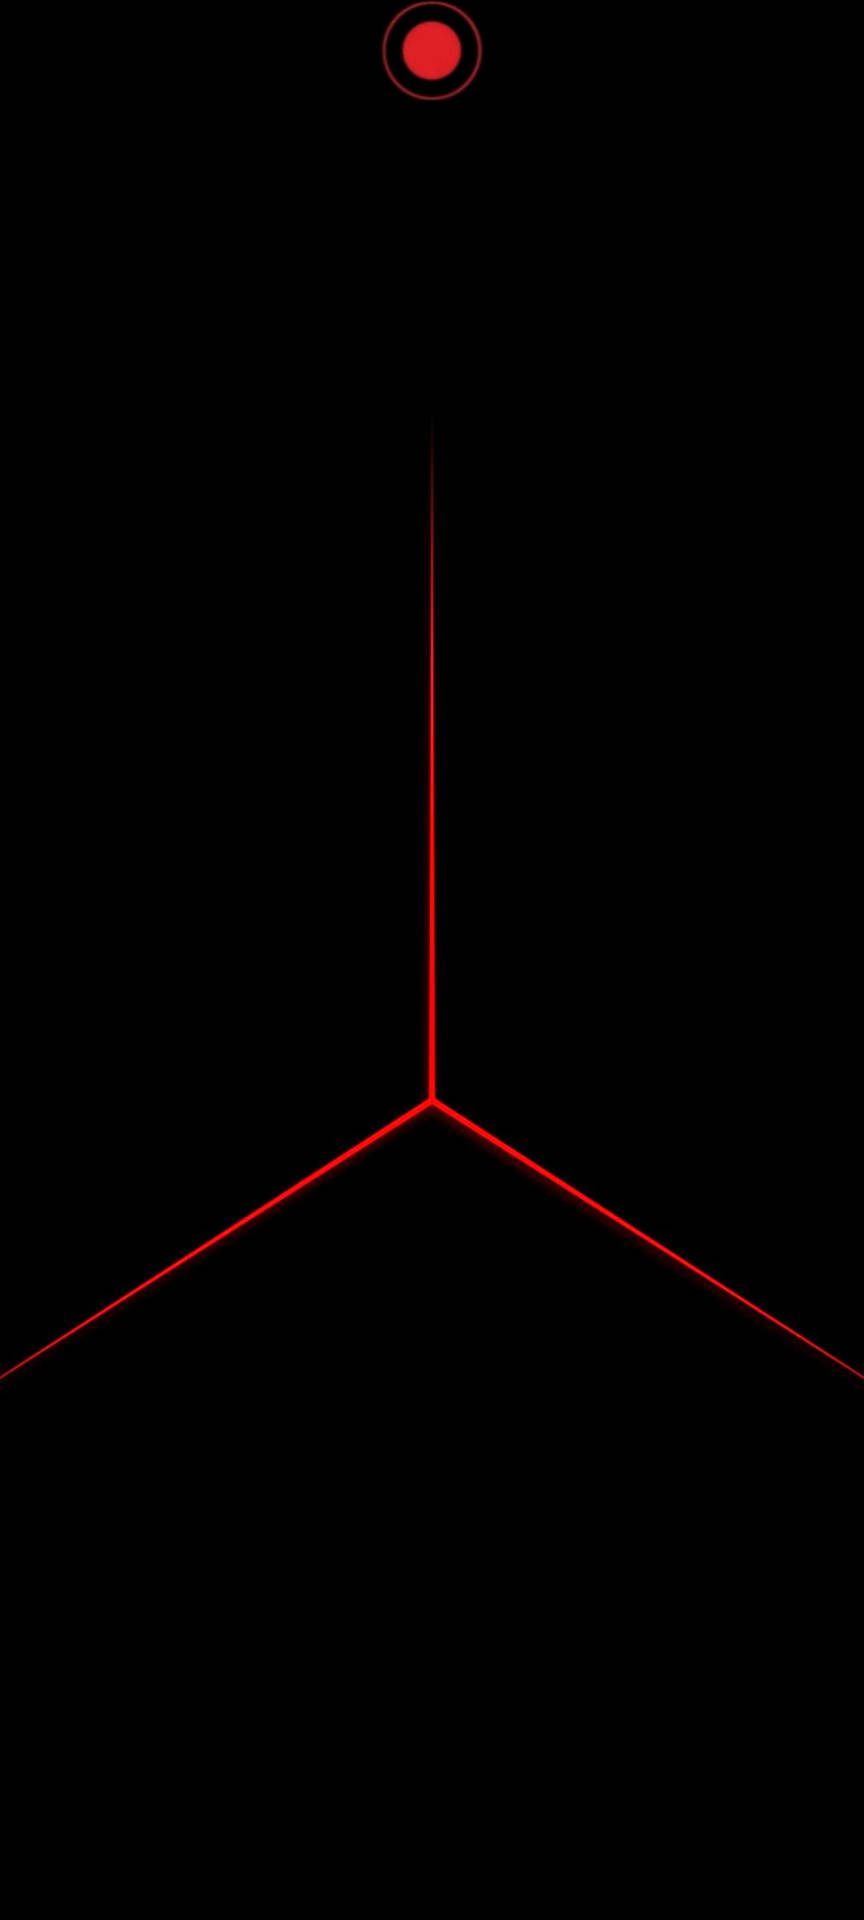 Dynamic Red Triangle Pattern for Redmi Note 9 Punch Hole Wallpaper